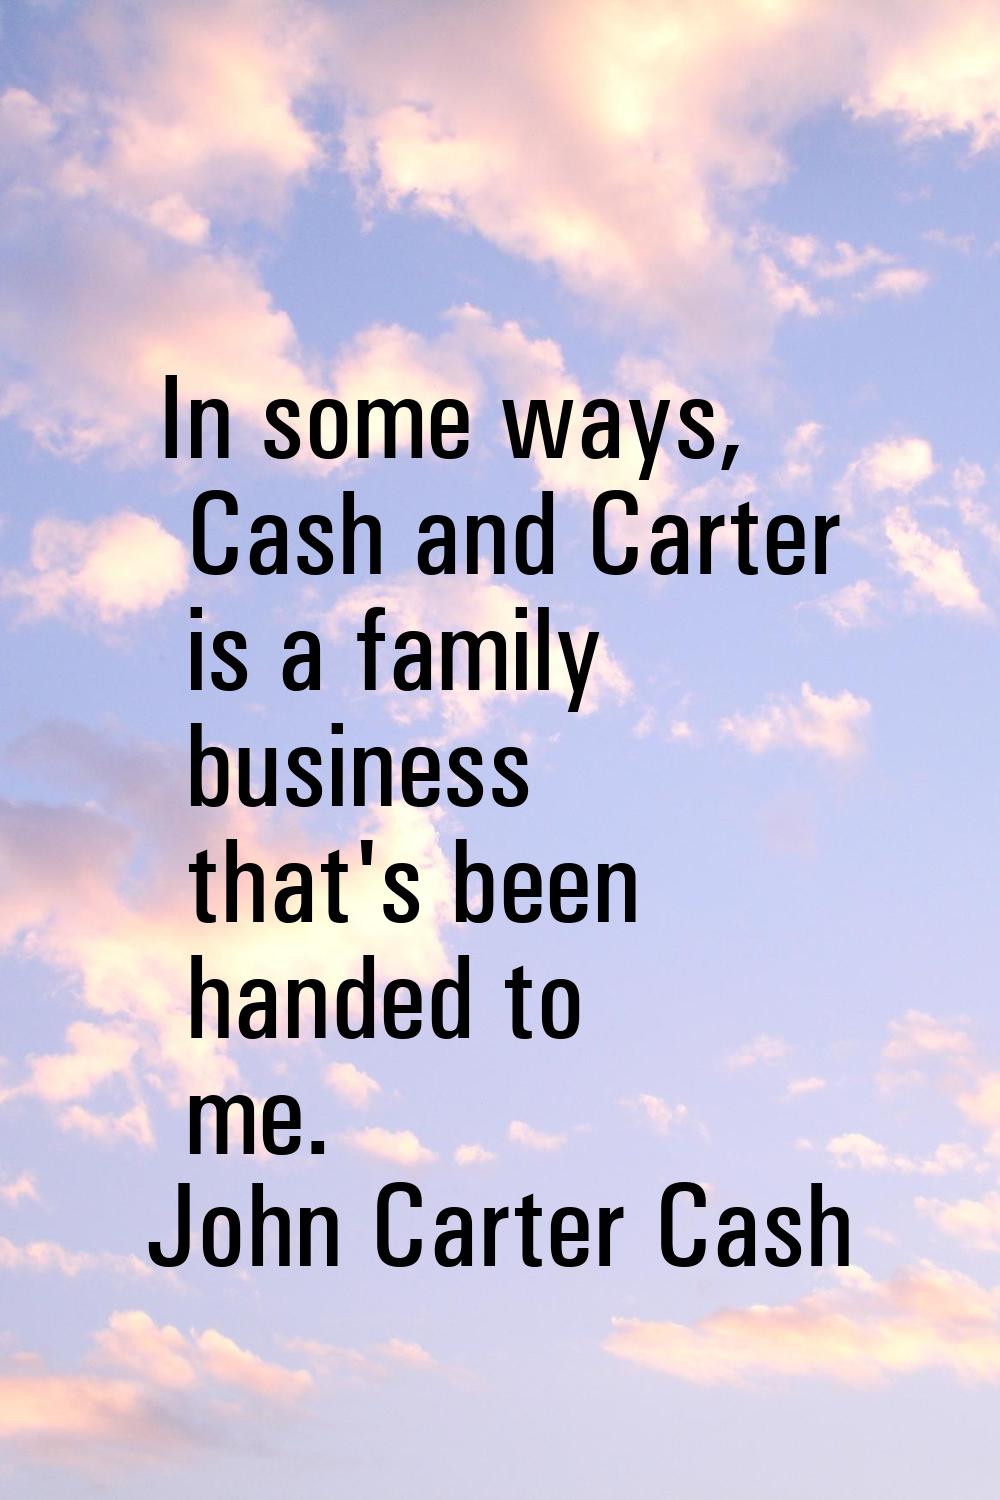 In some ways, Cash and Carter is a family business that's been handed to me.